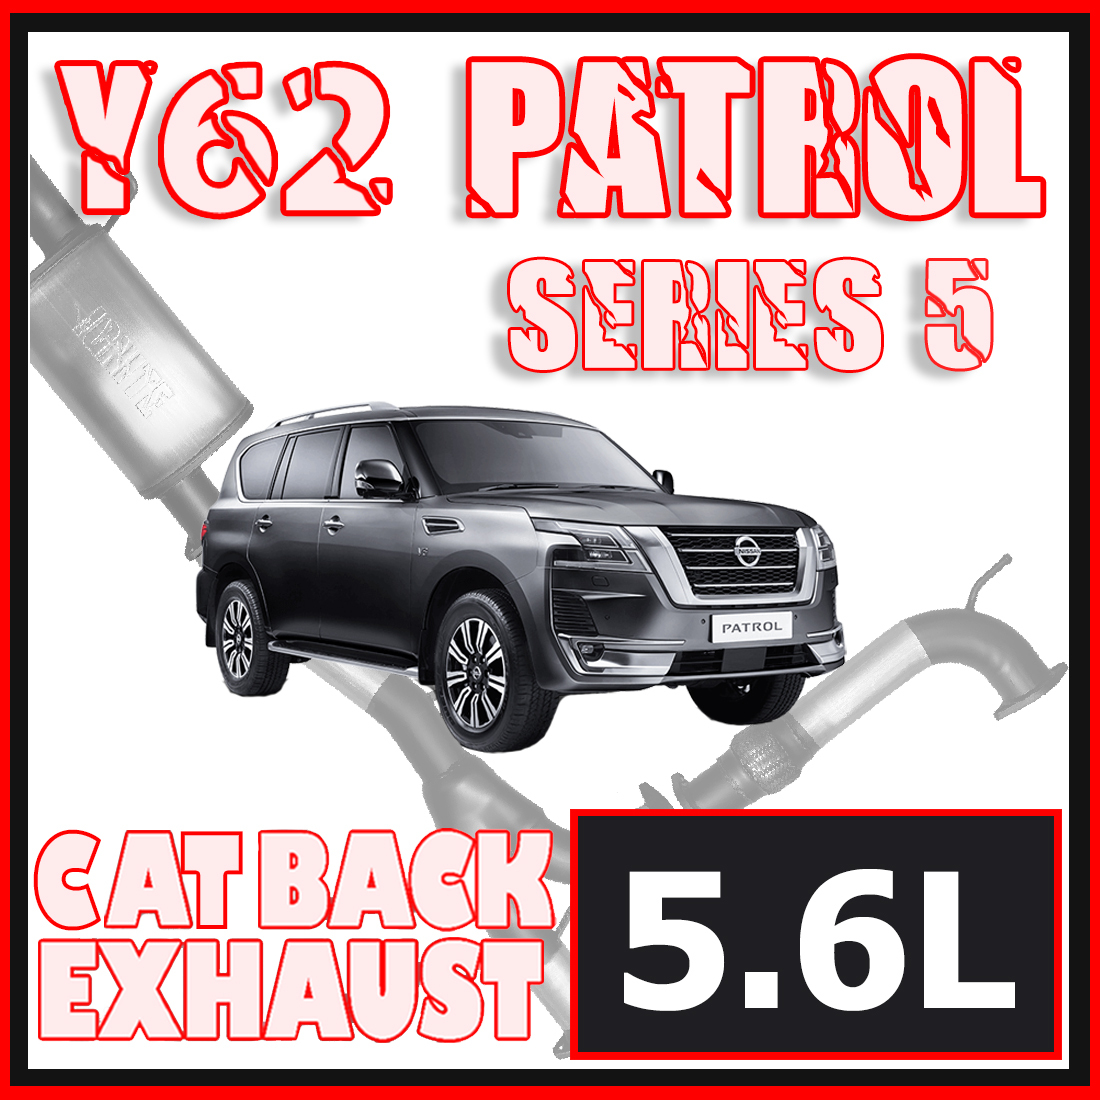 Nissan Y62 Patrol Exhaust Series 5 SUV 5.6L 3" Inch Systems image